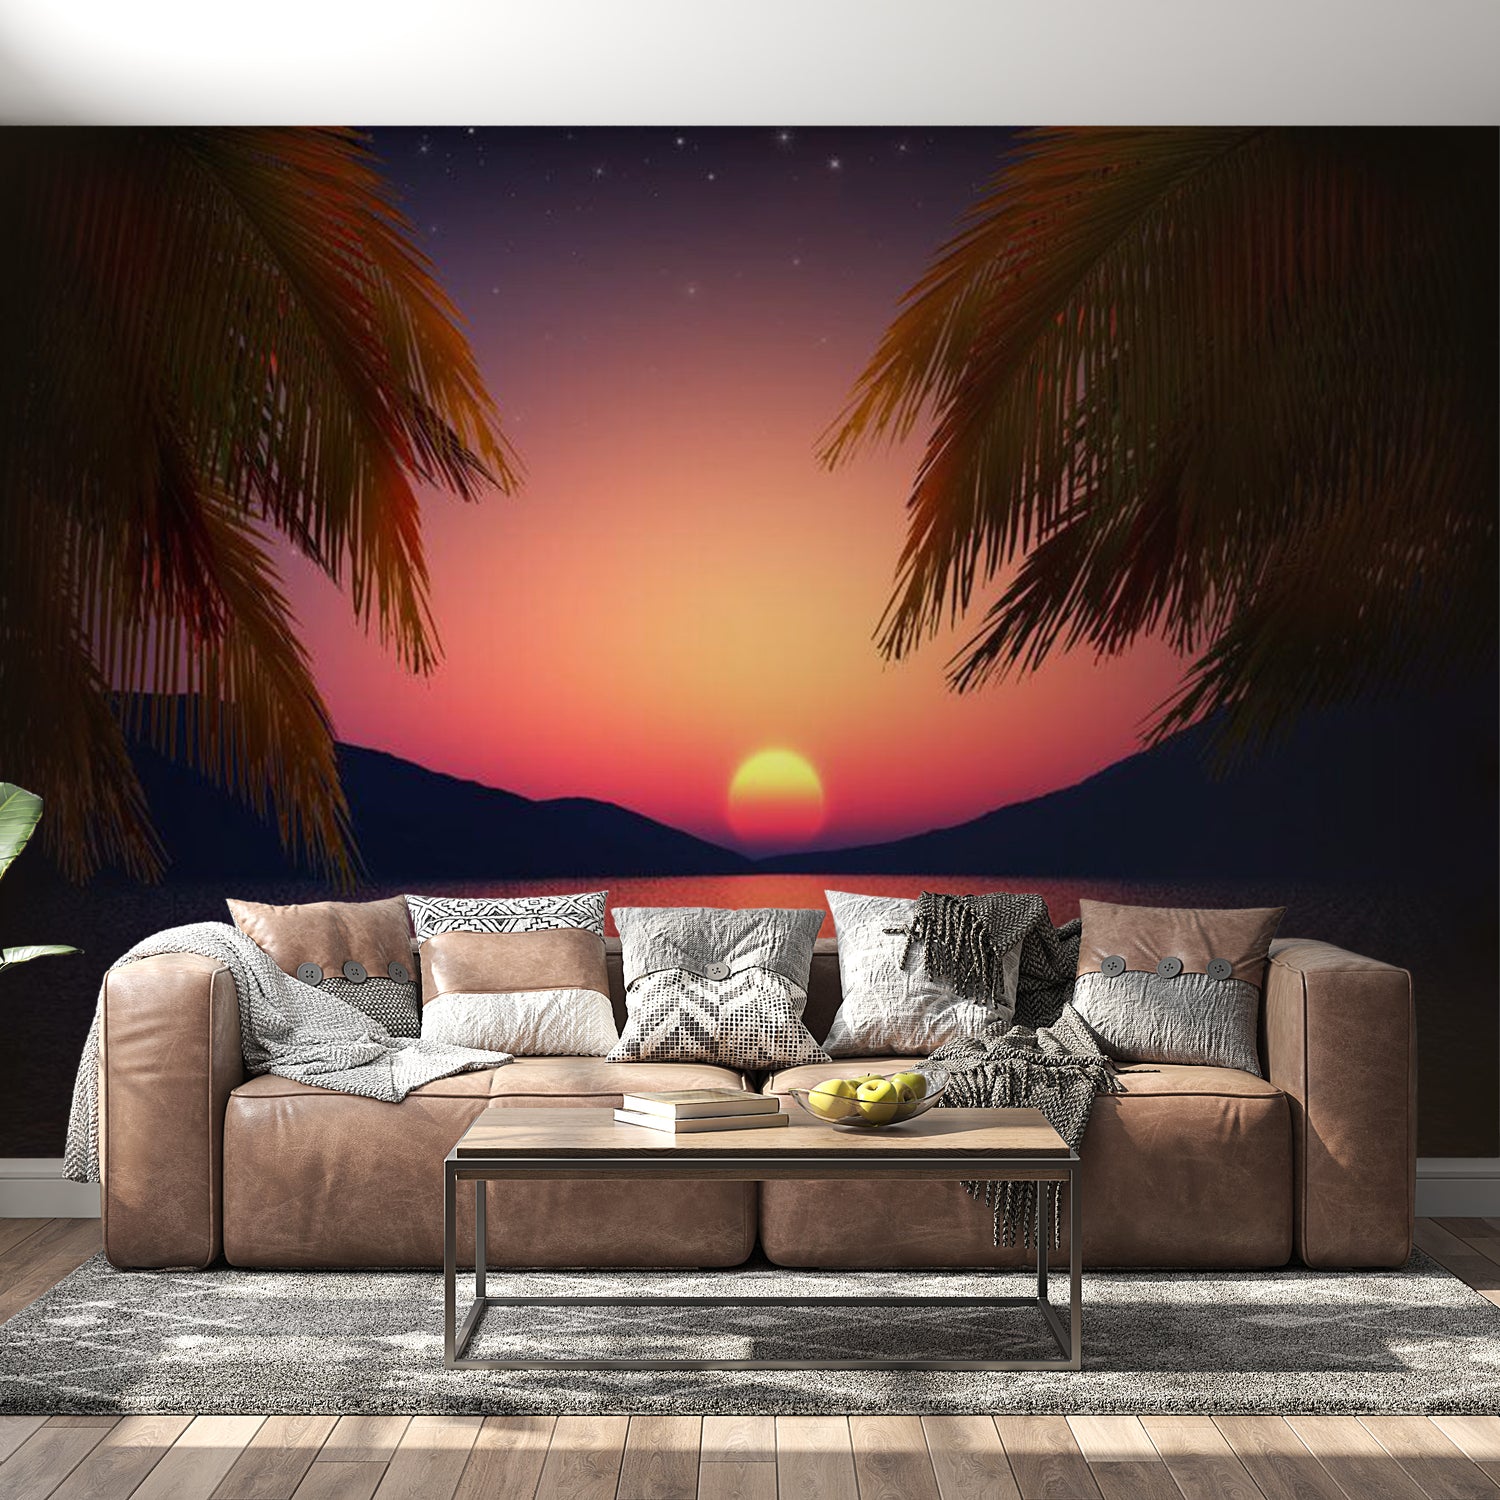 Peel & Stick Tropical Wall Mural - Romantic Evening On The Beach - Removable Wall Decals